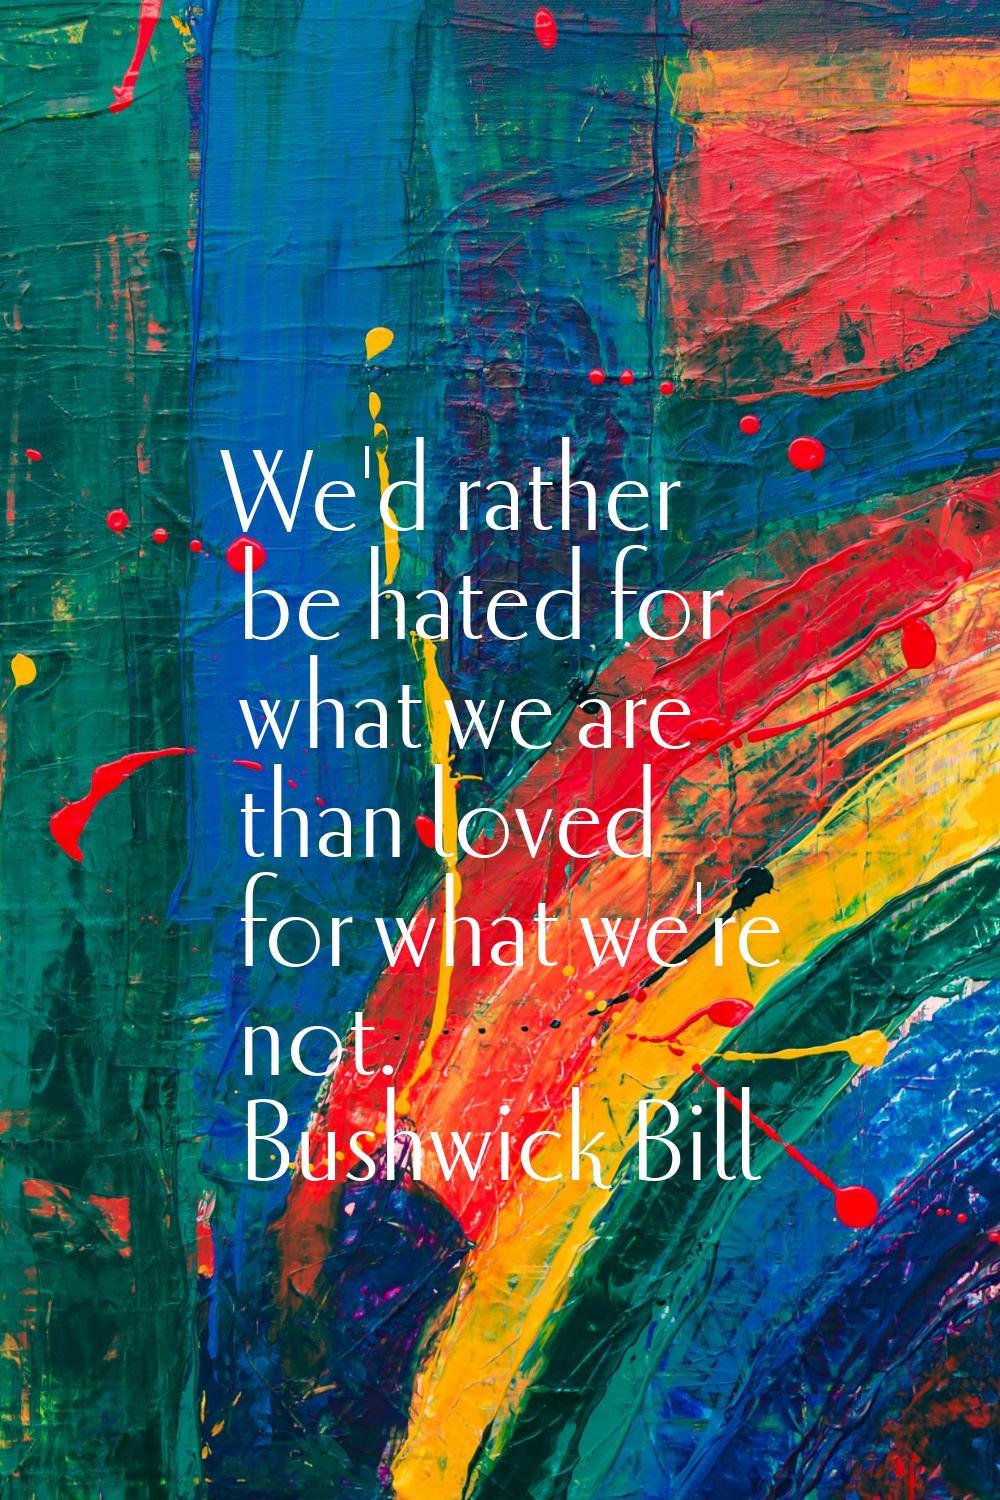 We'd rather be hated for what we are than loved for what we're not.